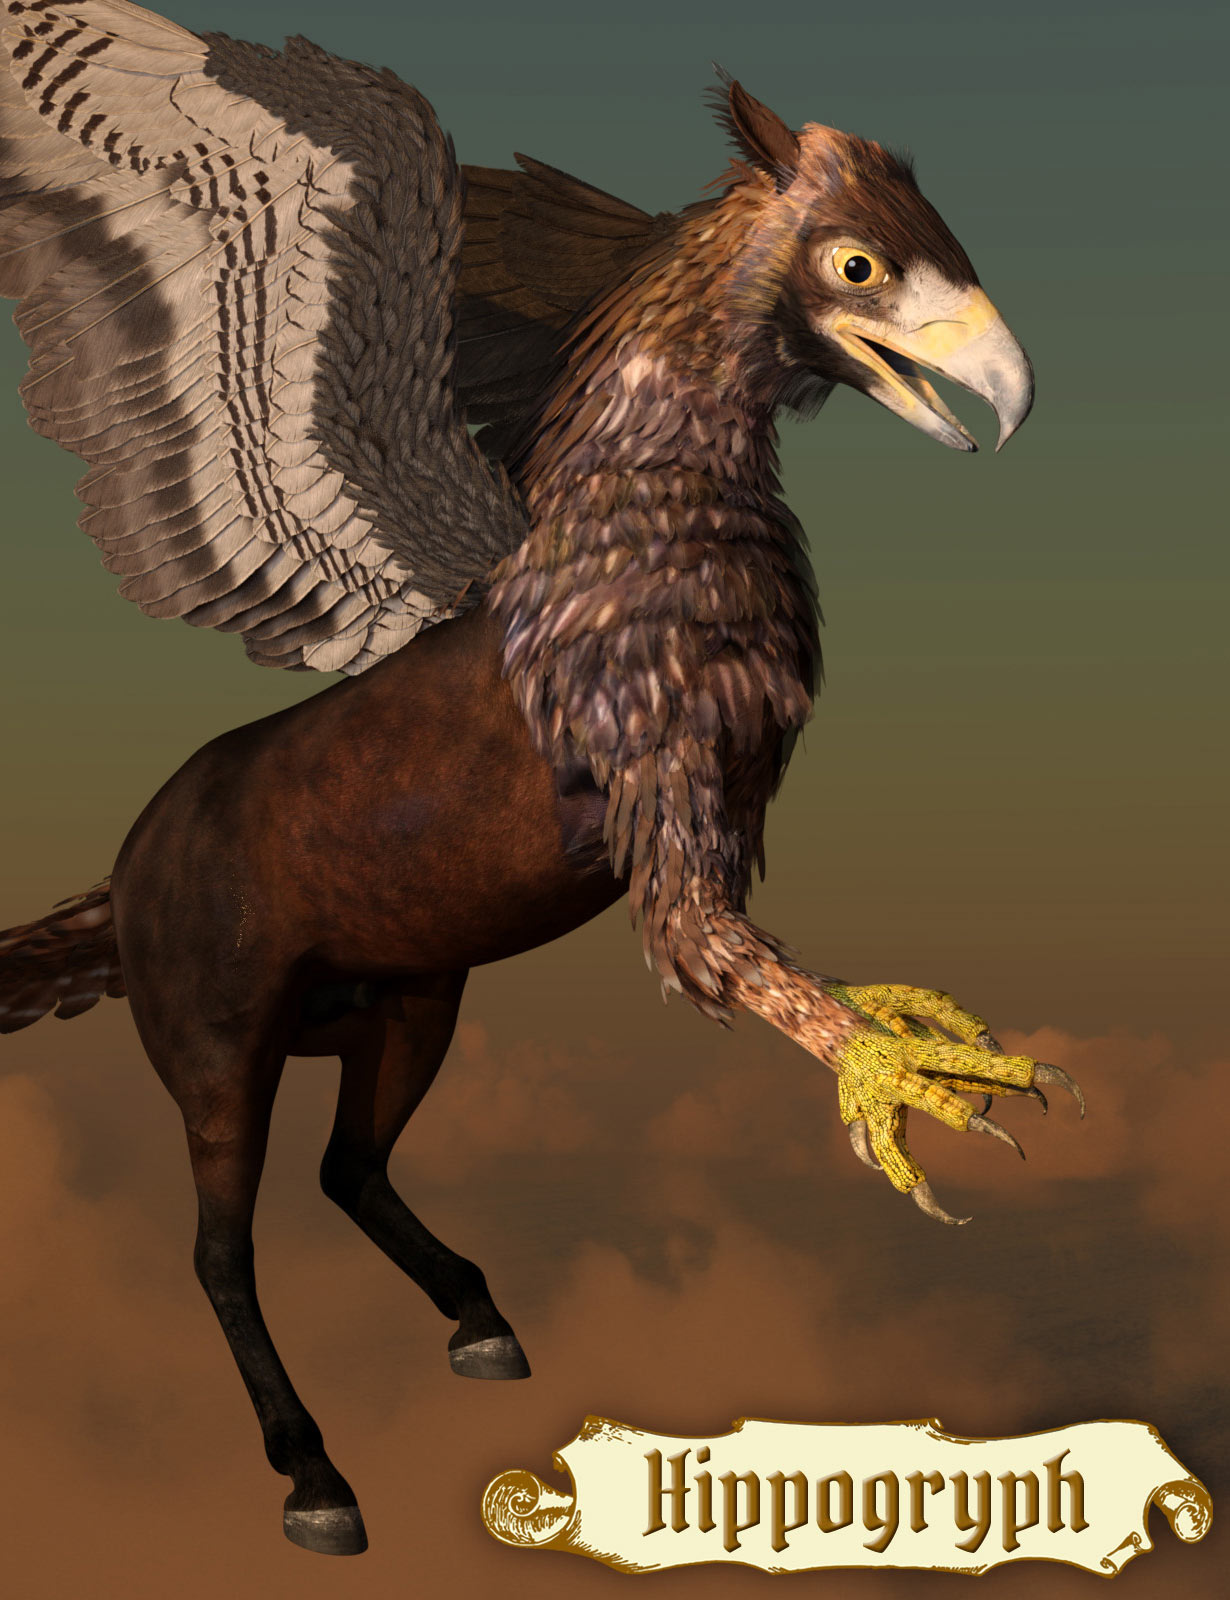 12115-hippogryph-add-on-for-the-hivewire-horse-main.jpg